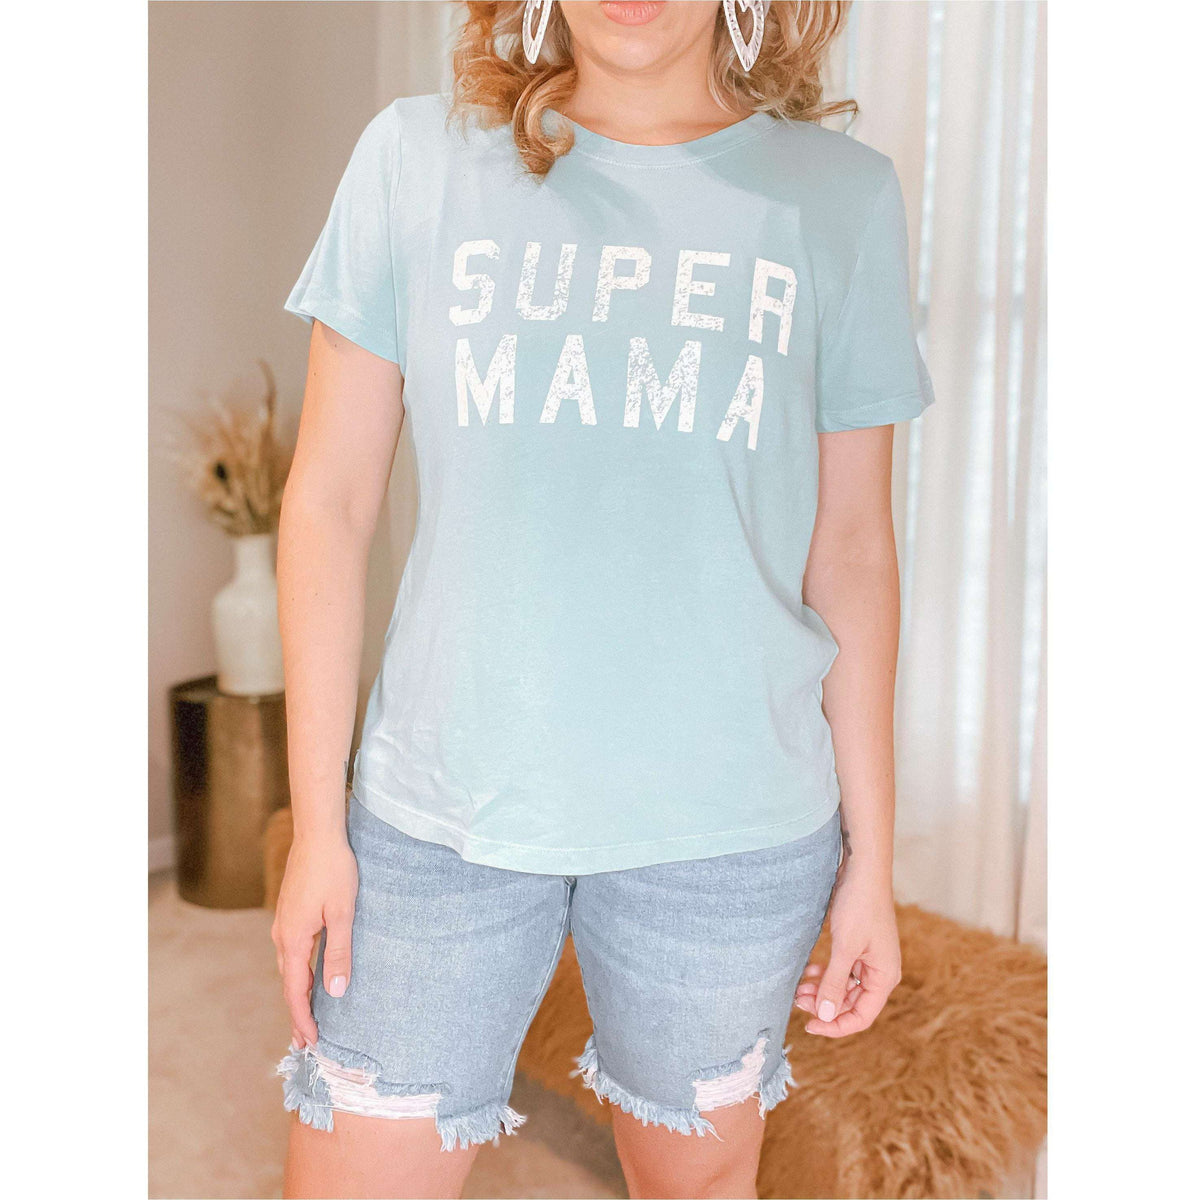 Super Mama Tee - The Hive by Chris Jesselle